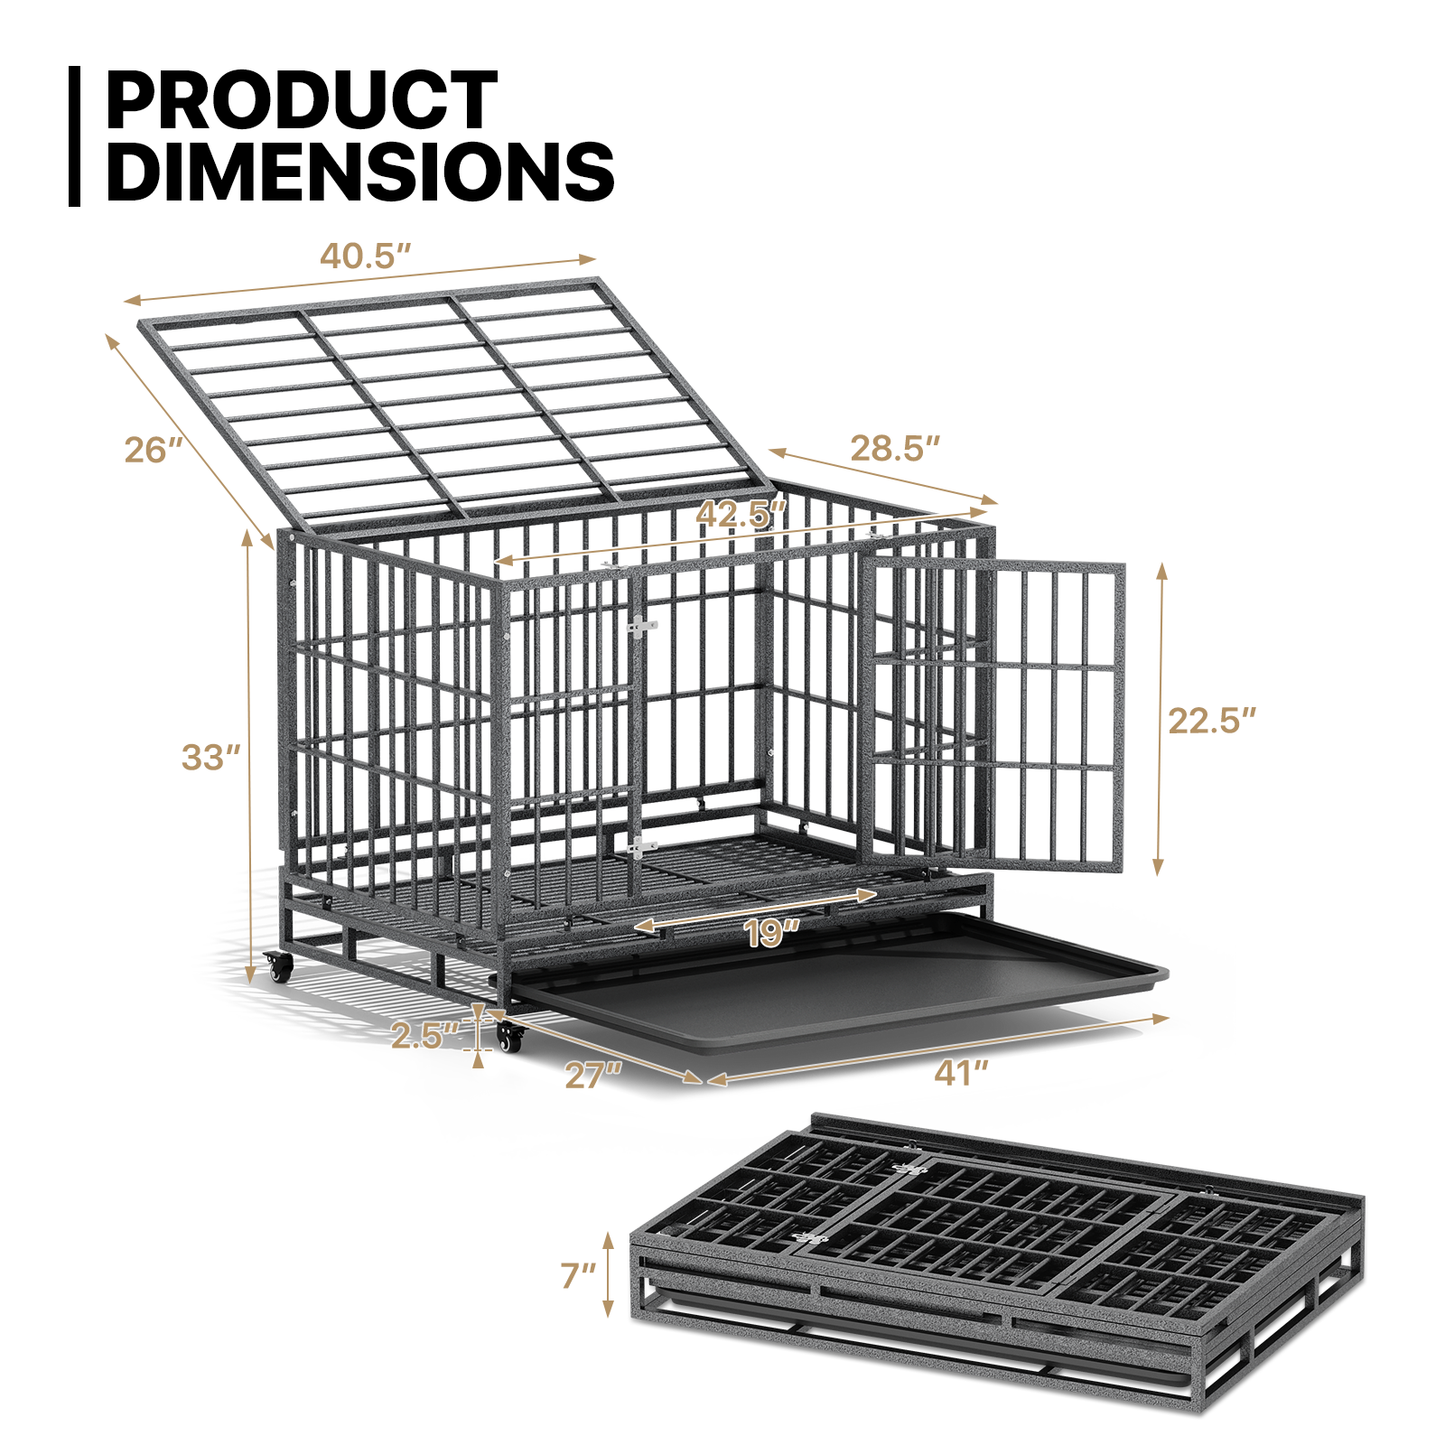 Dog Crate - Alloy Steel Frame - w/Slide-out Tray, 4 Casters - Dark Silver